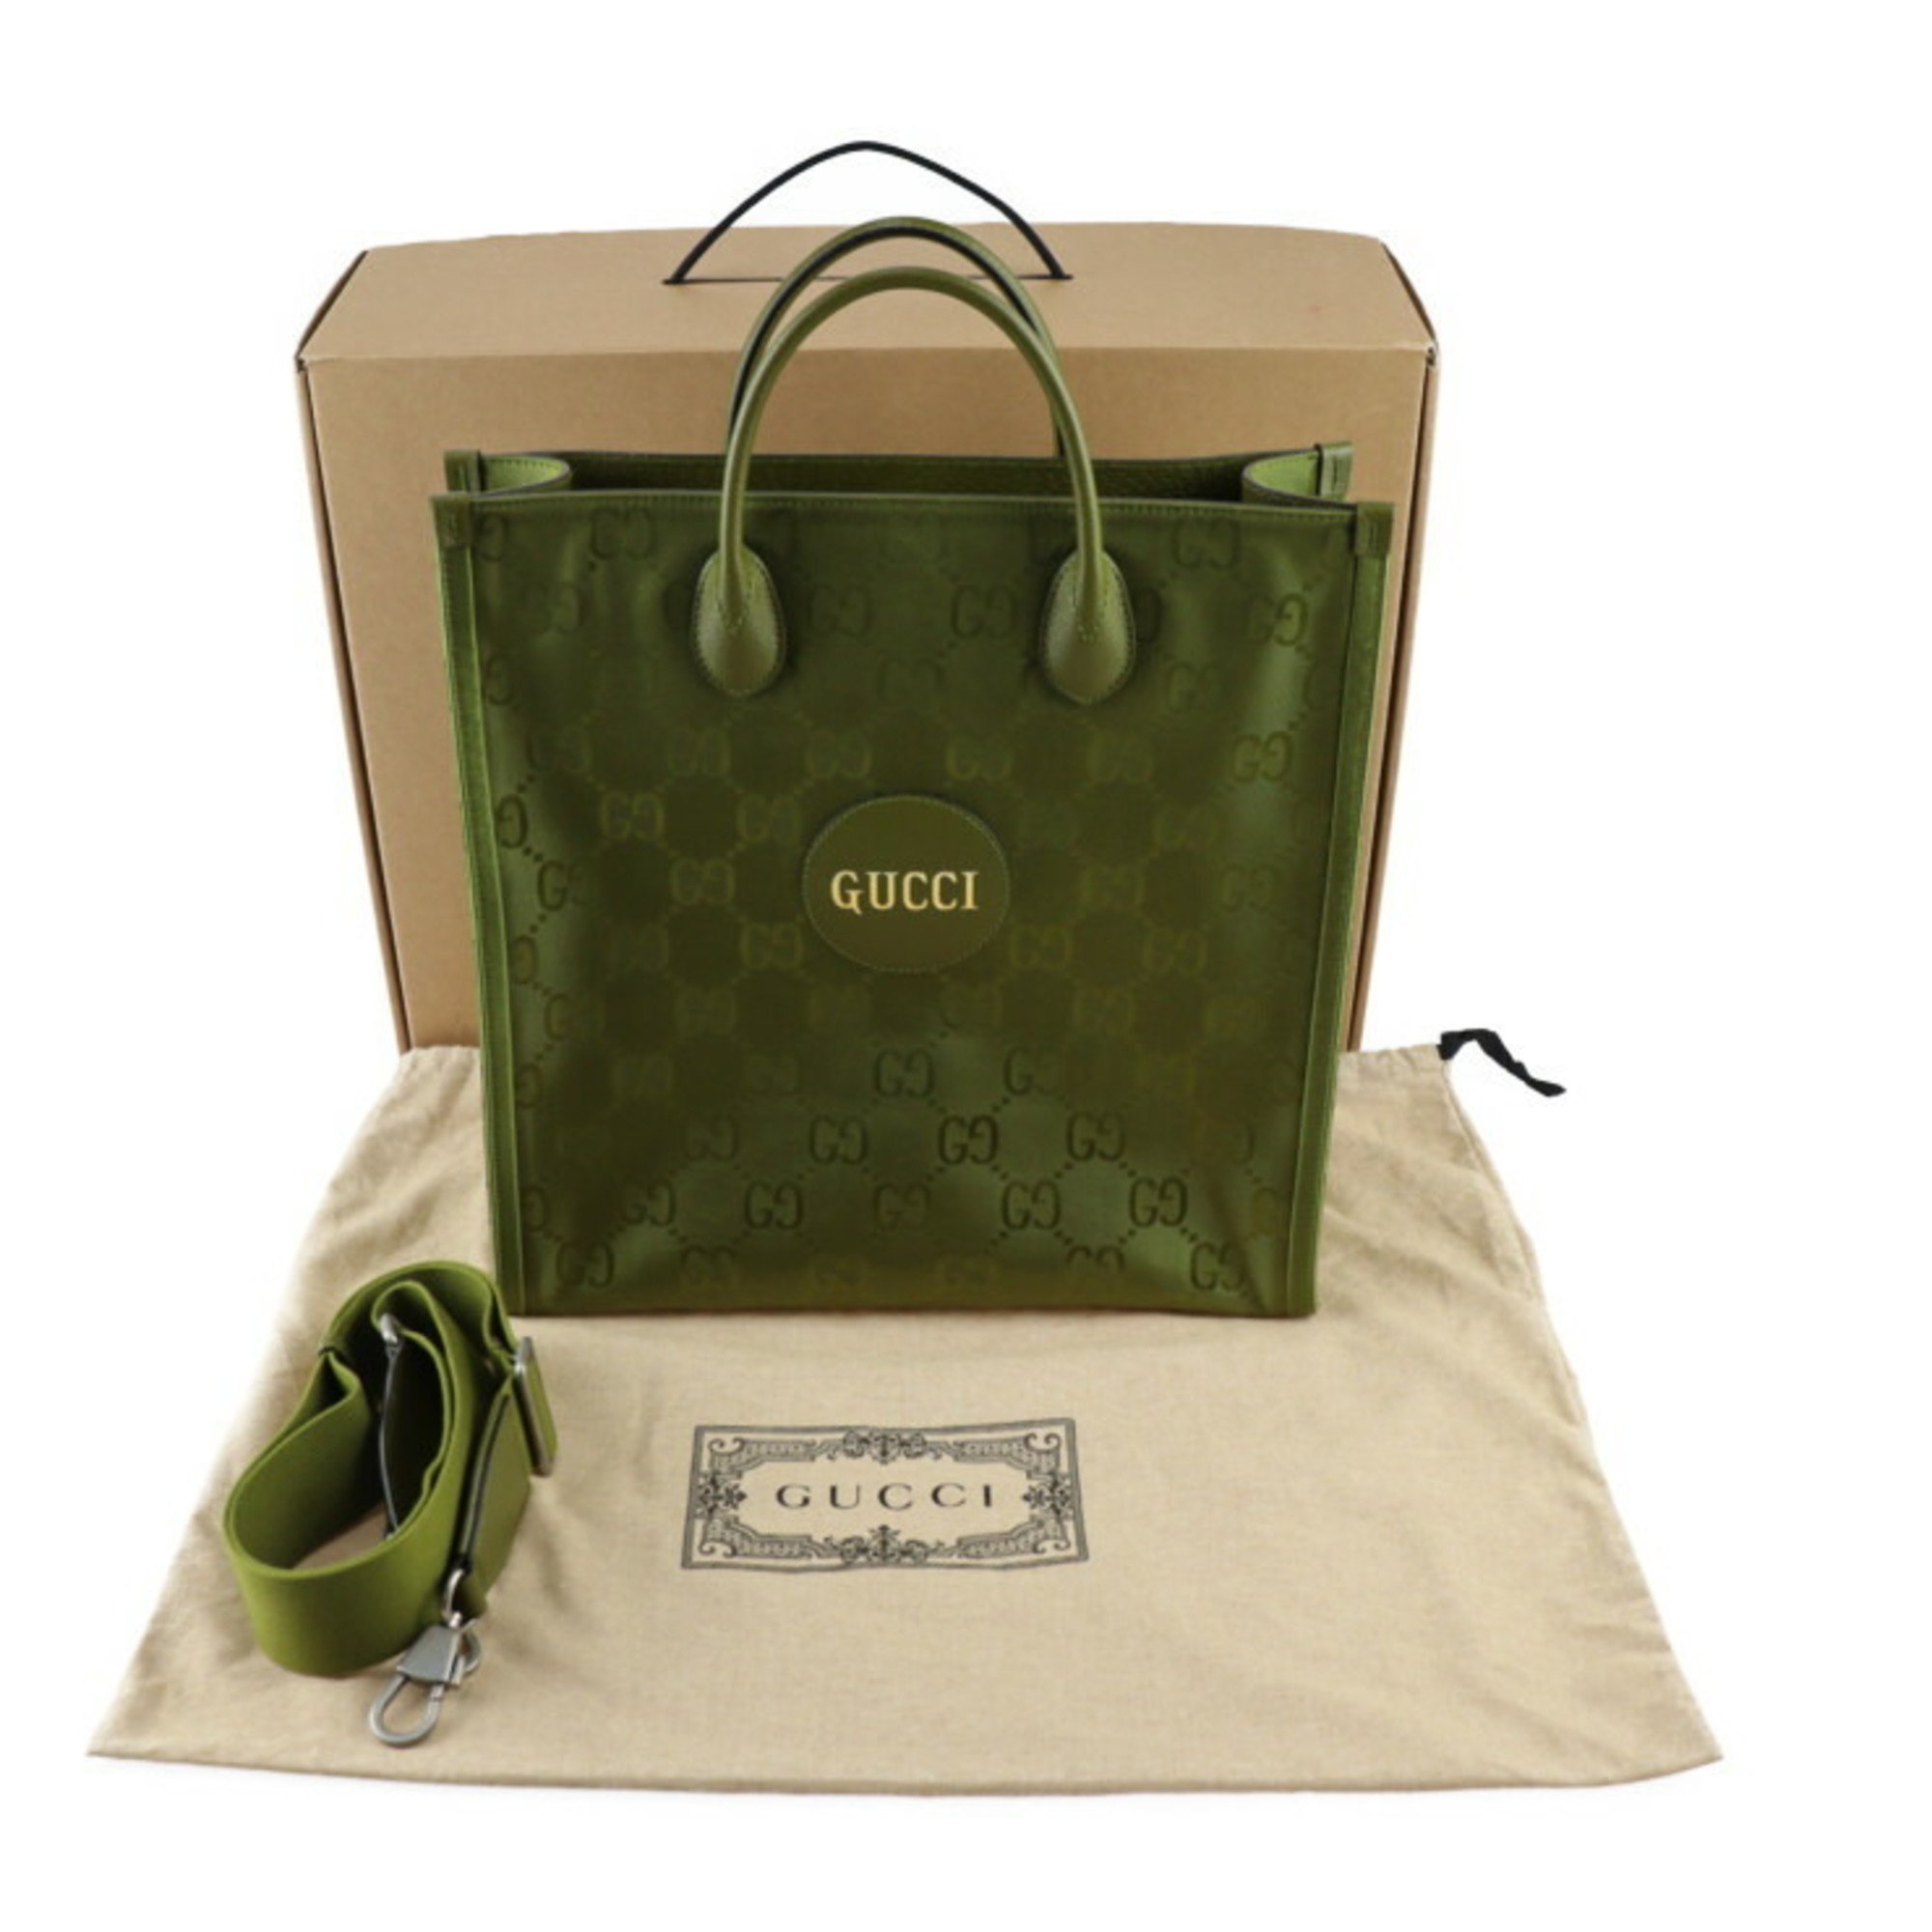 GUCCI Gucci Medium Tote Bag Off The Grid 696043 GG Nylon x Forest Green Silver Hardware 2WAY Shoulder Japan Limited 2023 Model